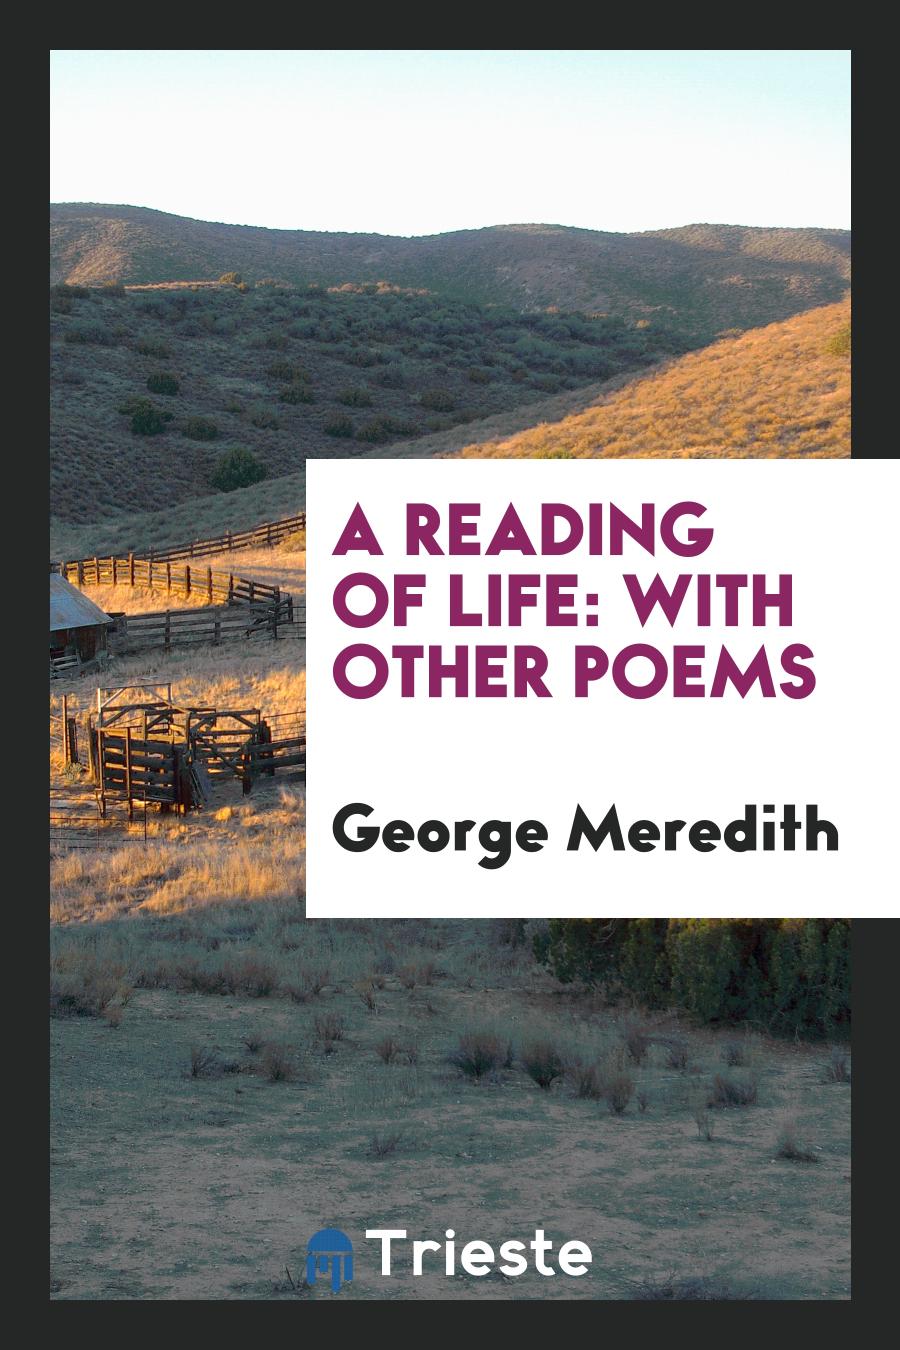 A Reading of Life: With Other Poems